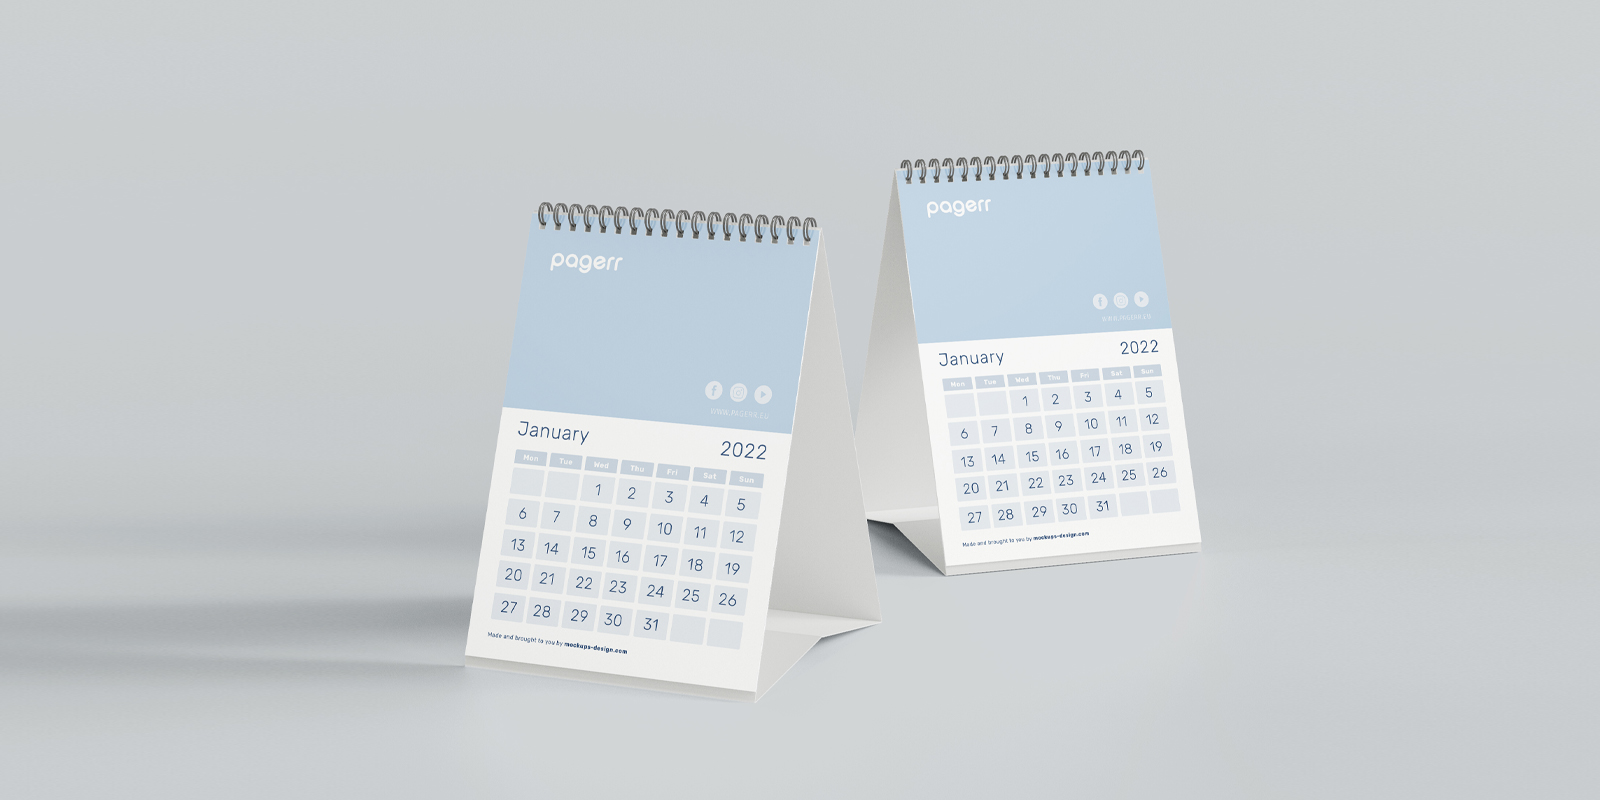 Desk calendars in Valencia - Print with Pagerr